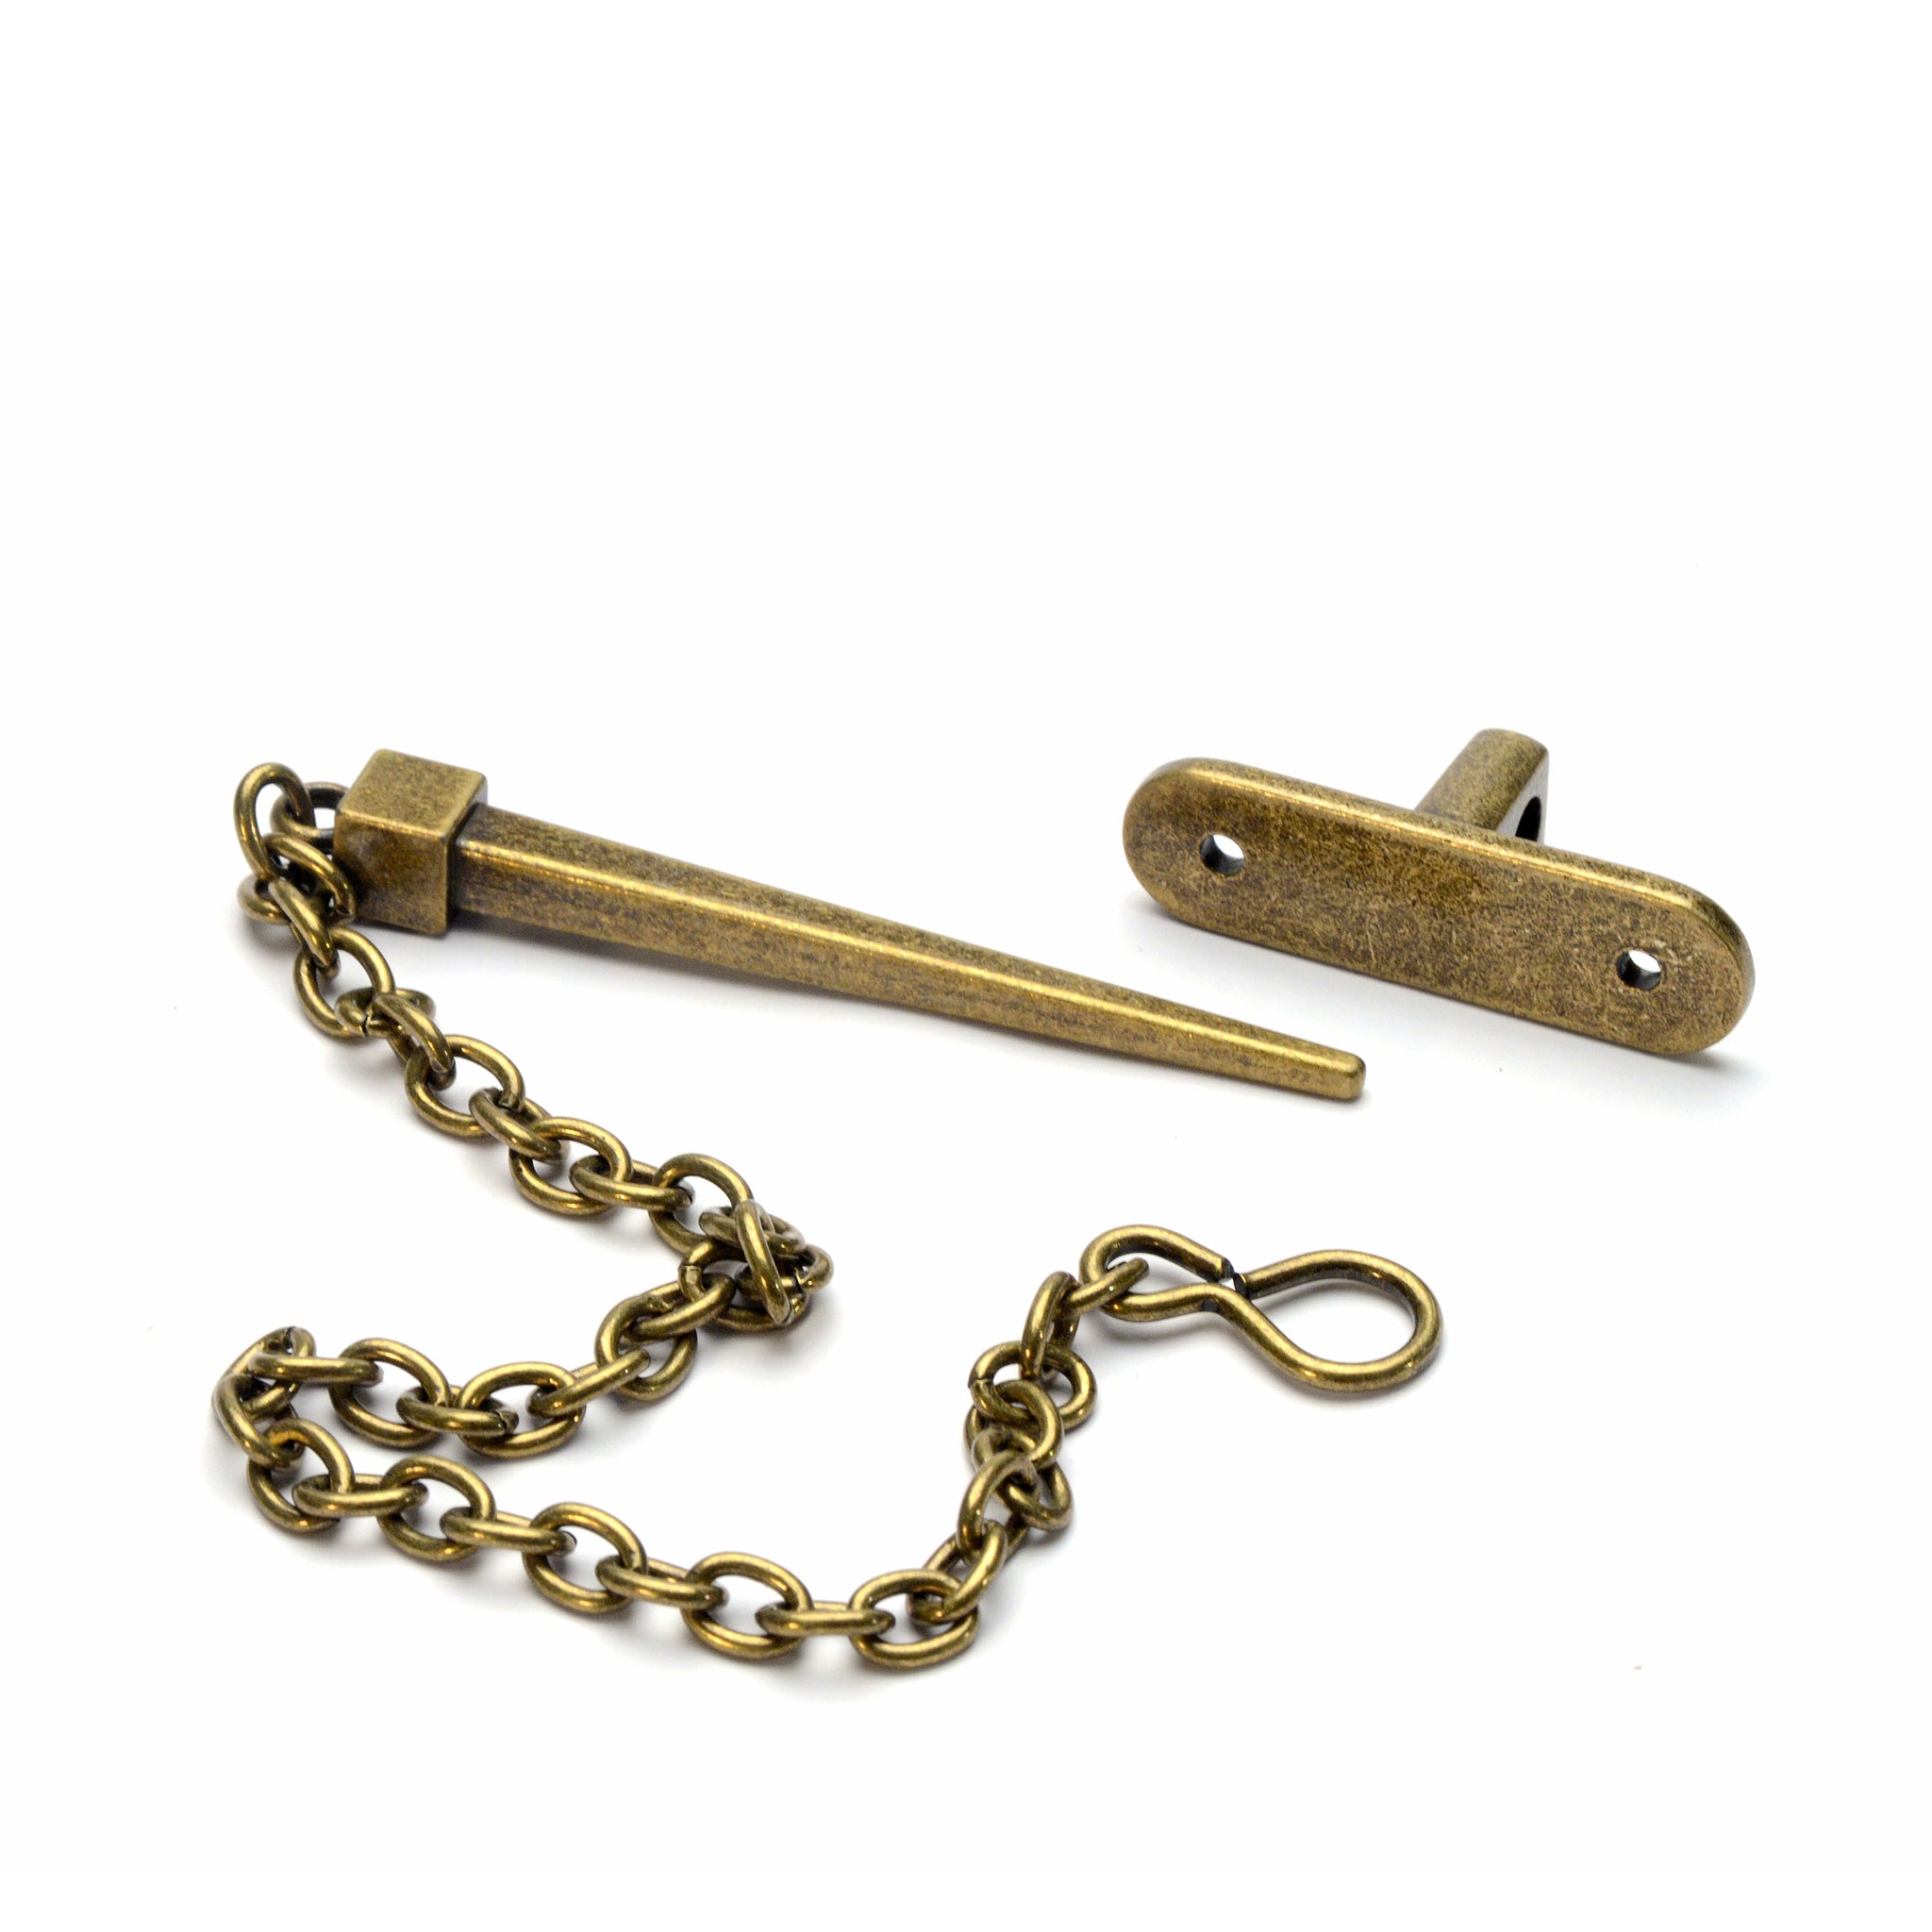 Antique Brass Pin & Chain Clasp from Identity Leathercraft